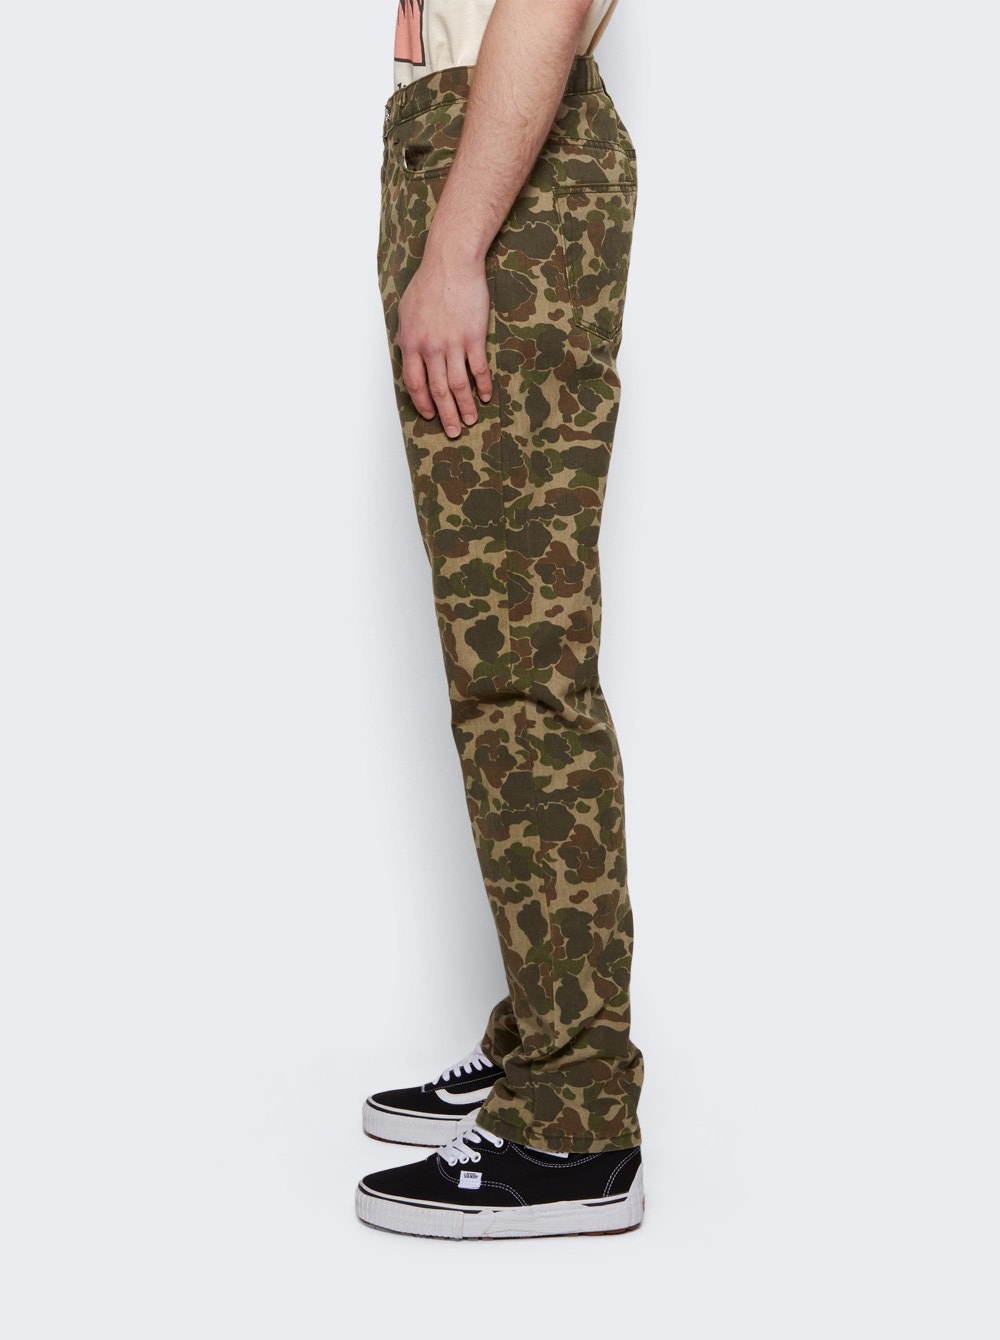 Road Camo 5001 Jean Camouflage Green - 4